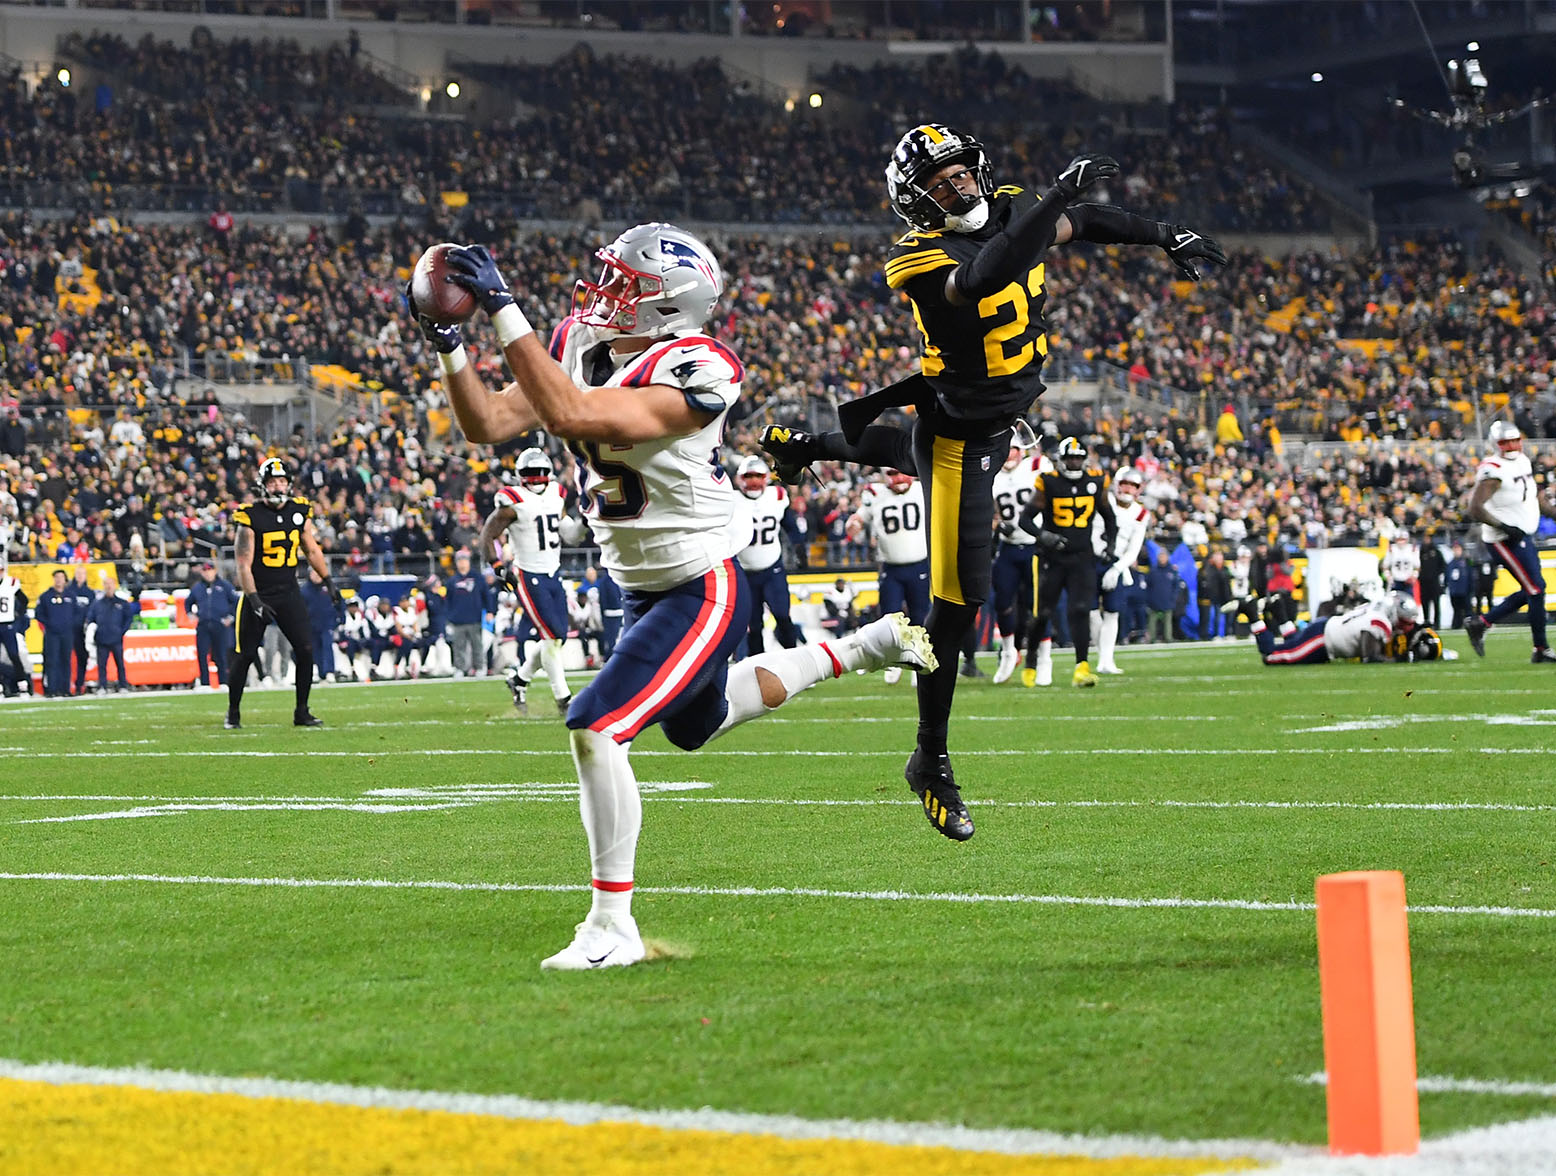 PITTSBURGH, PENNSYLVANIA - DECEMBER 07: Tight end Hunter Henry (85) of the New England Patriots catches a pass for a touchdown in the second quarter against the Pittsburgh Steelers at Acrisure Stadium on December 07, 2023 in Pittsburgh, Pennsylvania. (Photo by Joe Sargent/Getty Images)